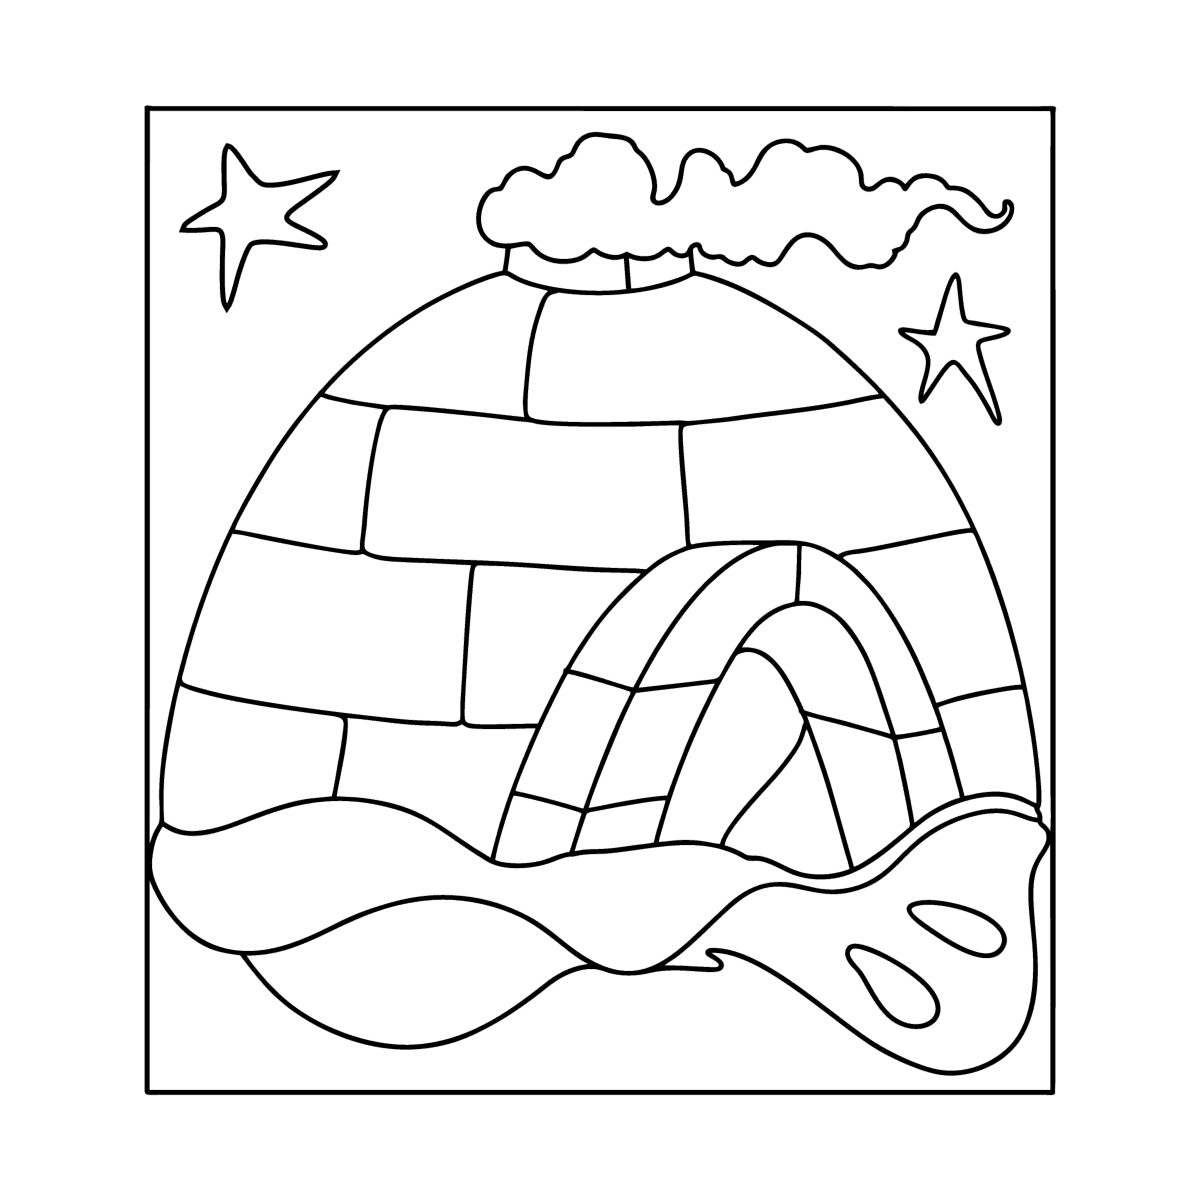 How to Draw an Igloo | A Step-by-Step Tutorial for Kids